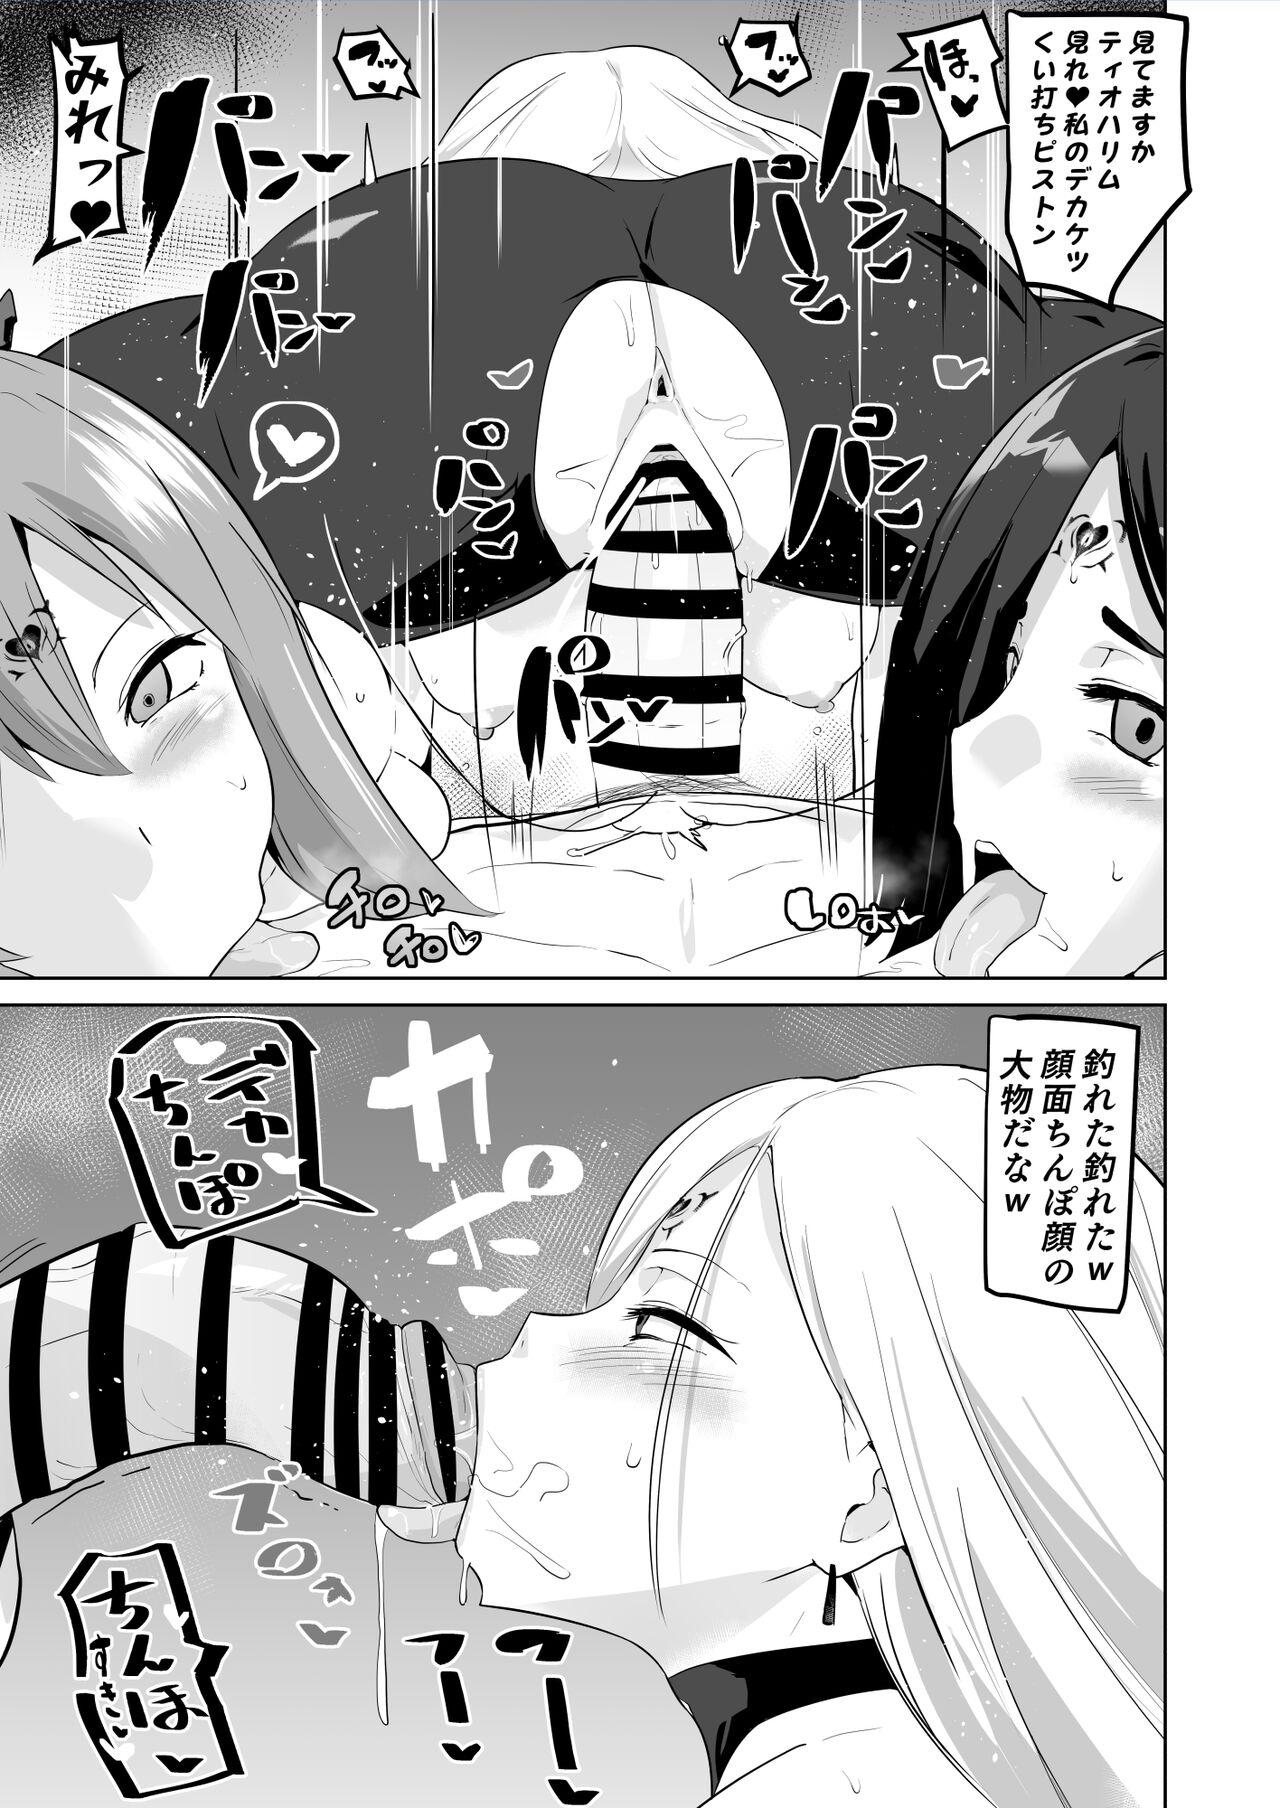 Groupsex アライズカルト洗脳 - Tales of arise Bigcock - Page 4